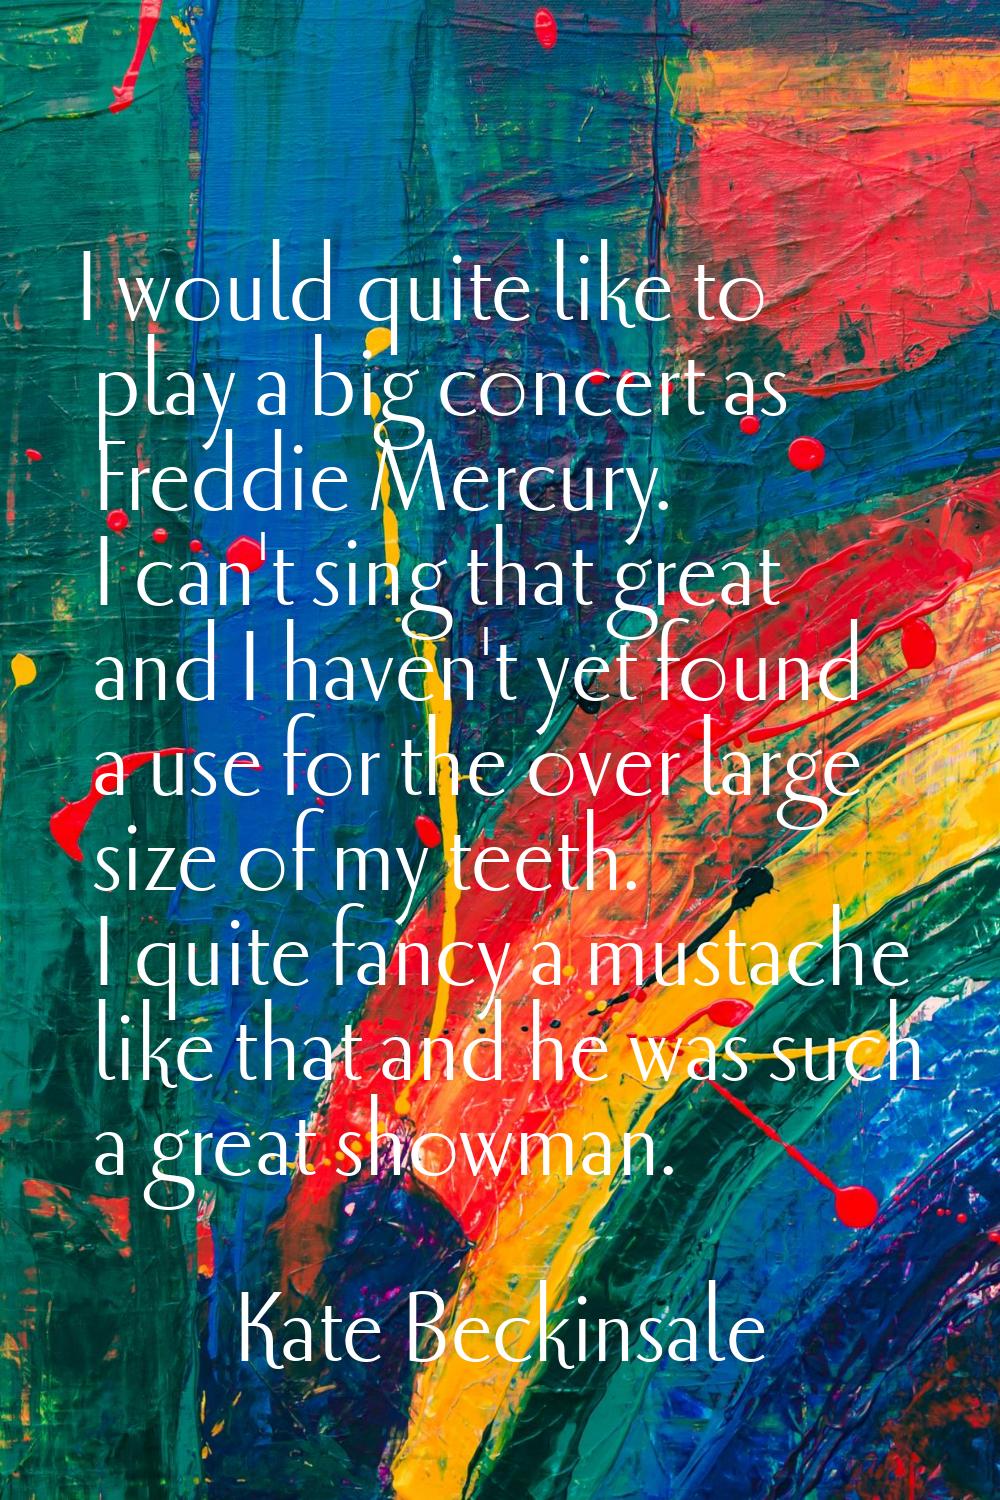 I would quite like to play a big concert as Freddie Mercury. I can't sing that great and I haven't 